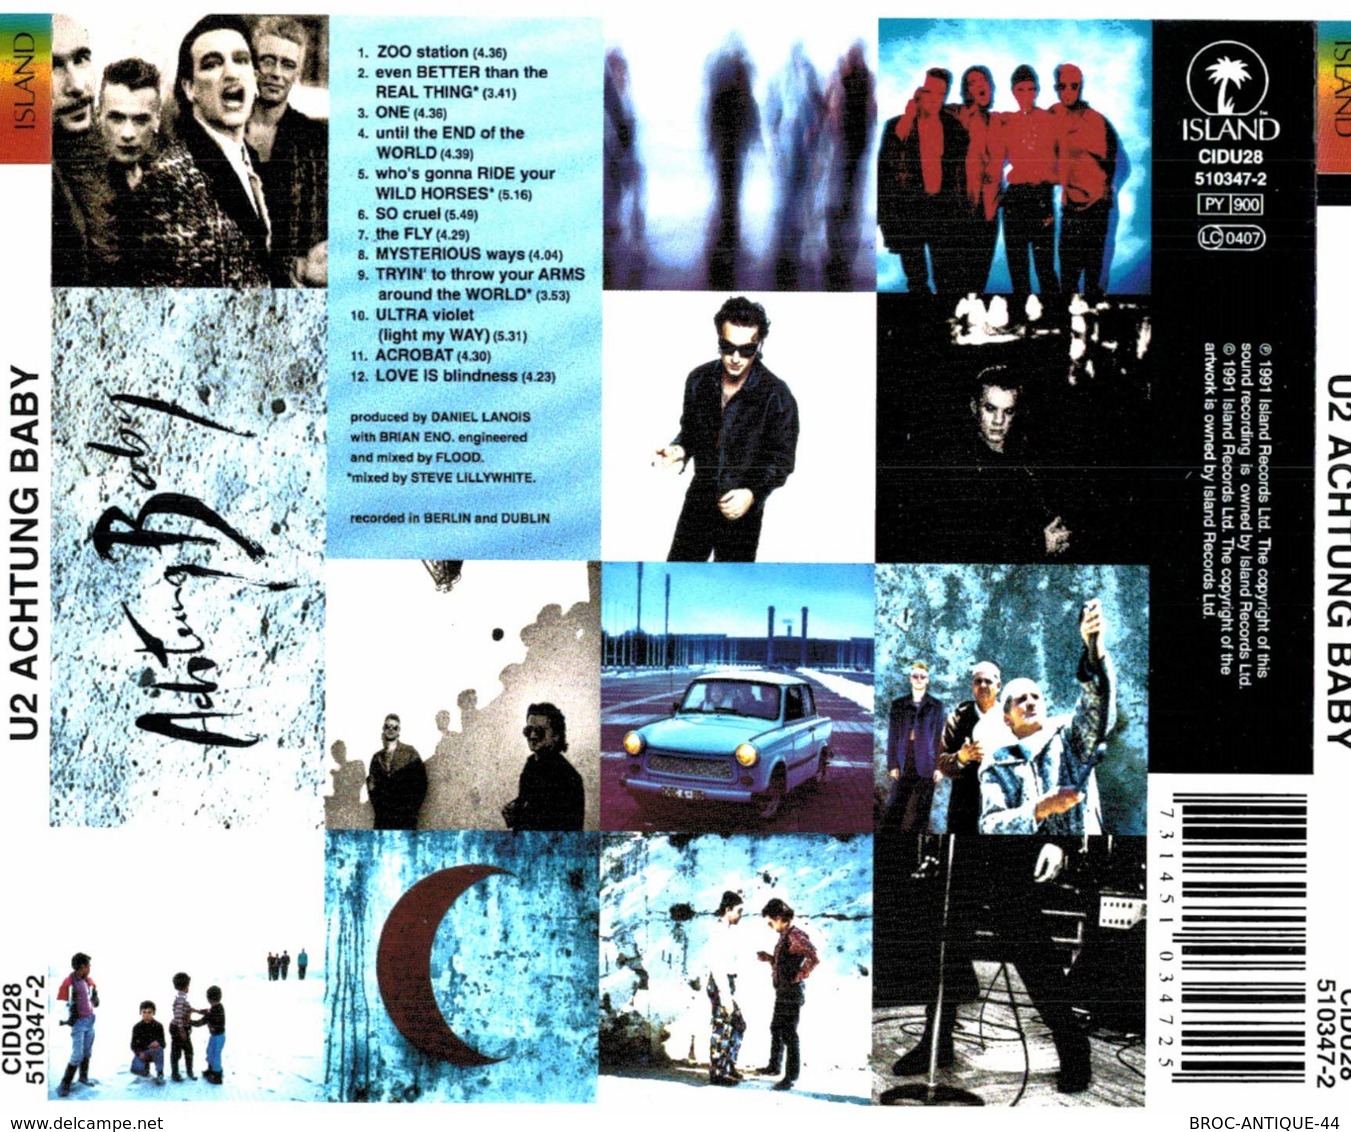 CD N°3223 - U2 - ACHTUNG BABY - COMPILATION 12 TITRES - Rock